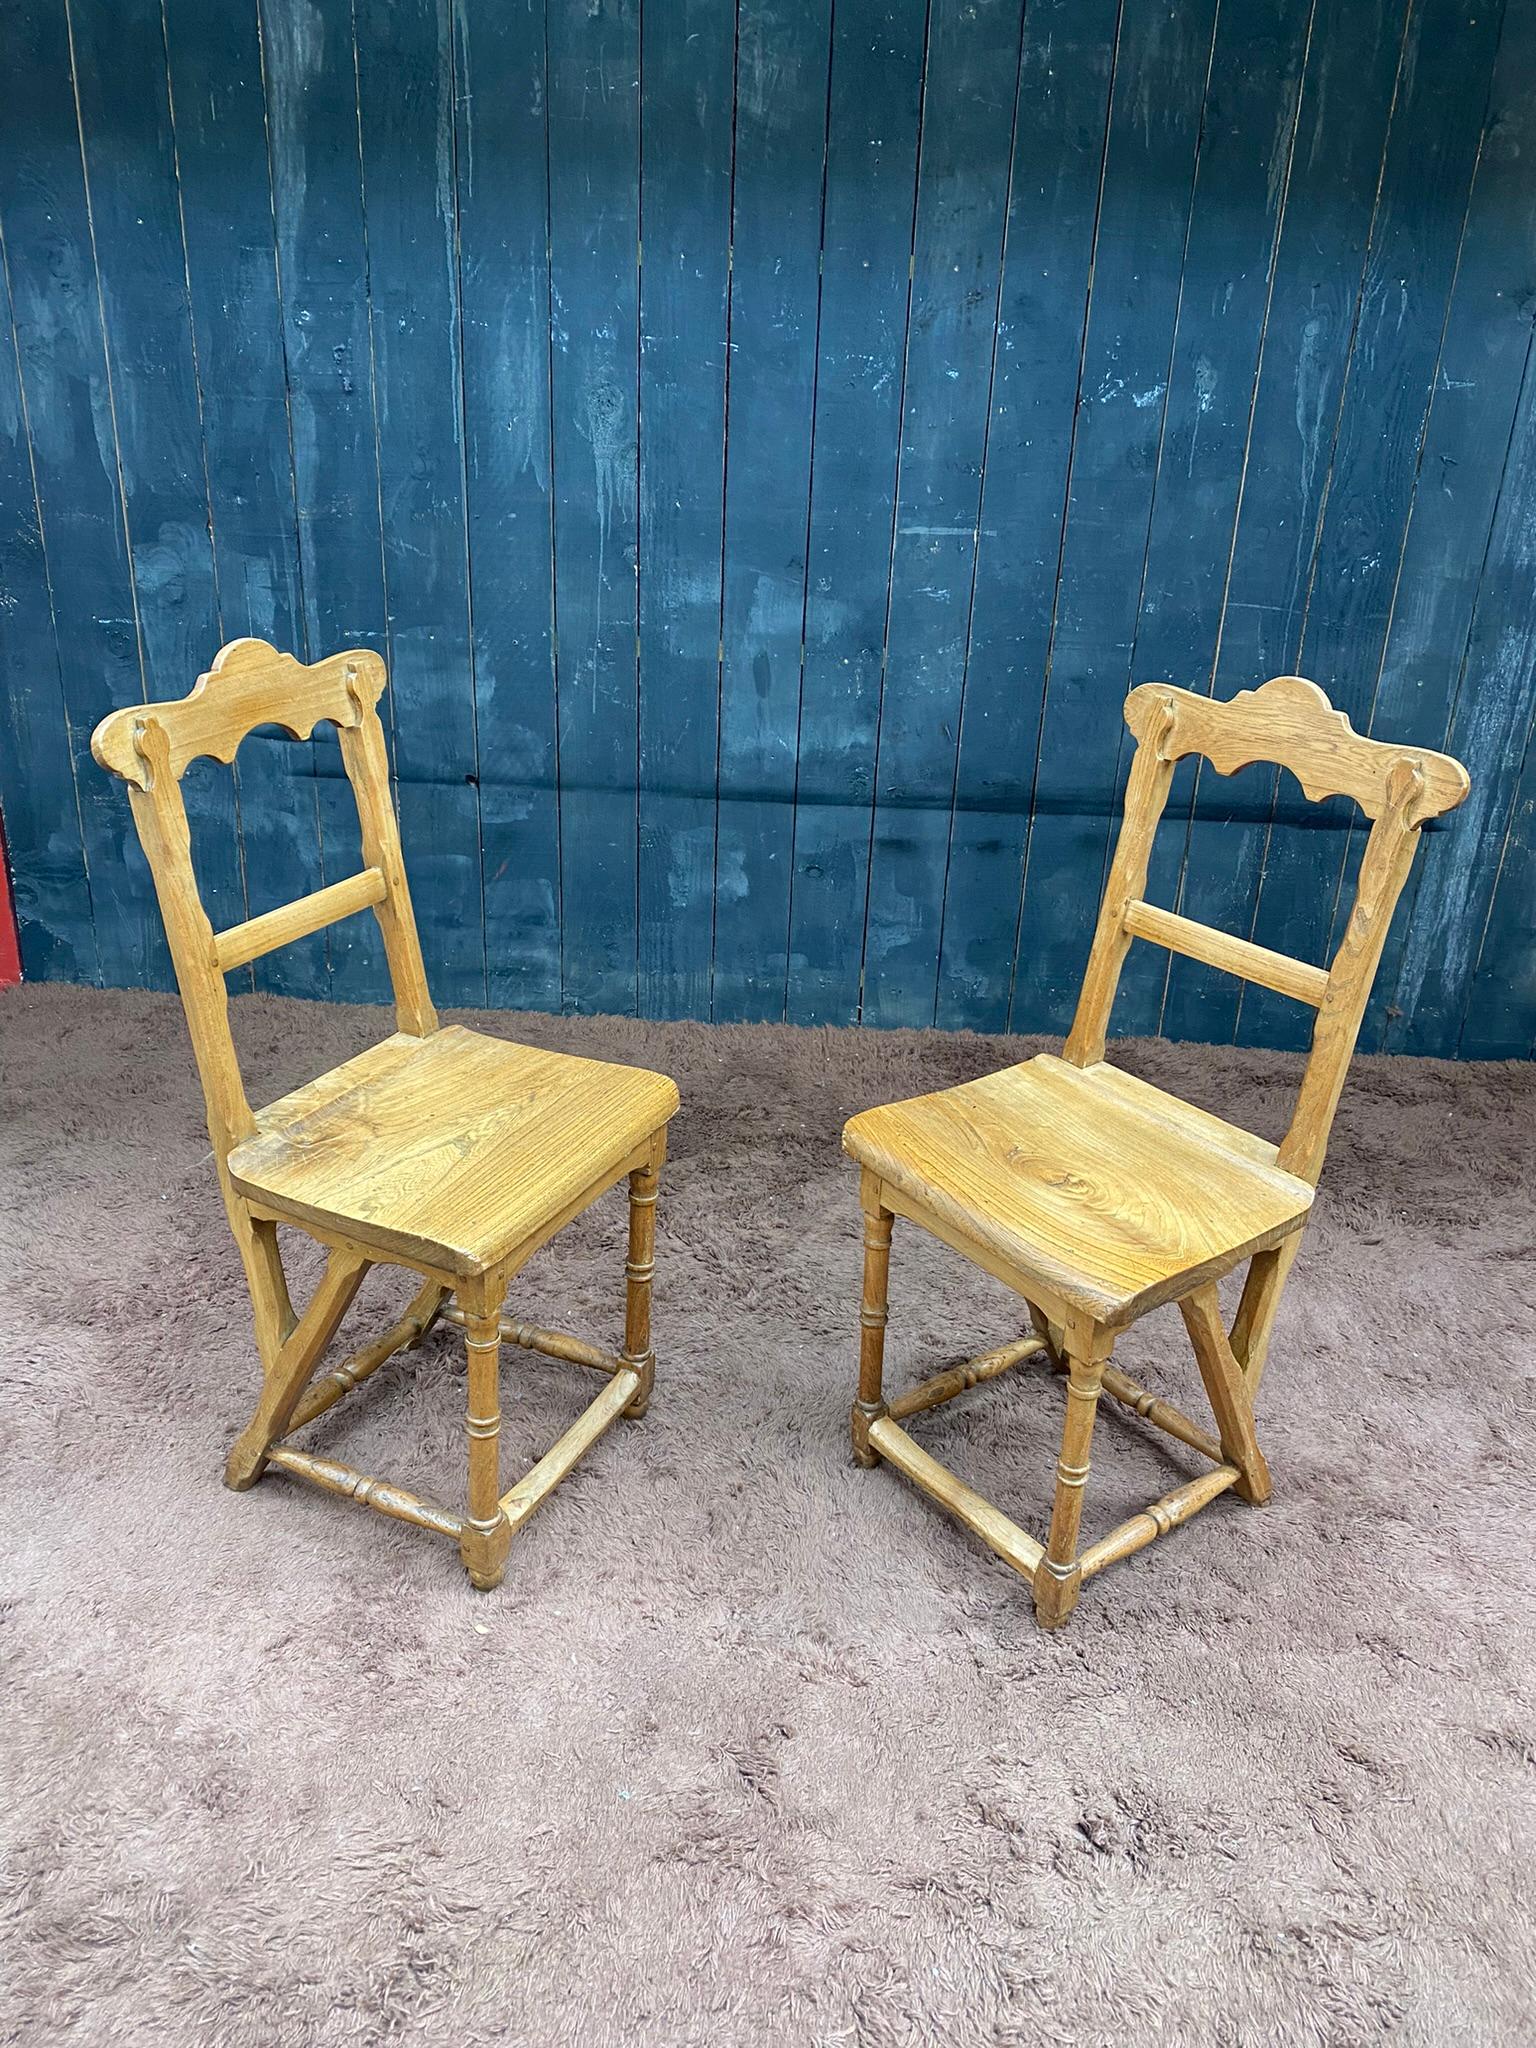 6 Mountain Chairs, in ELM, circa 1900 For Sale 2